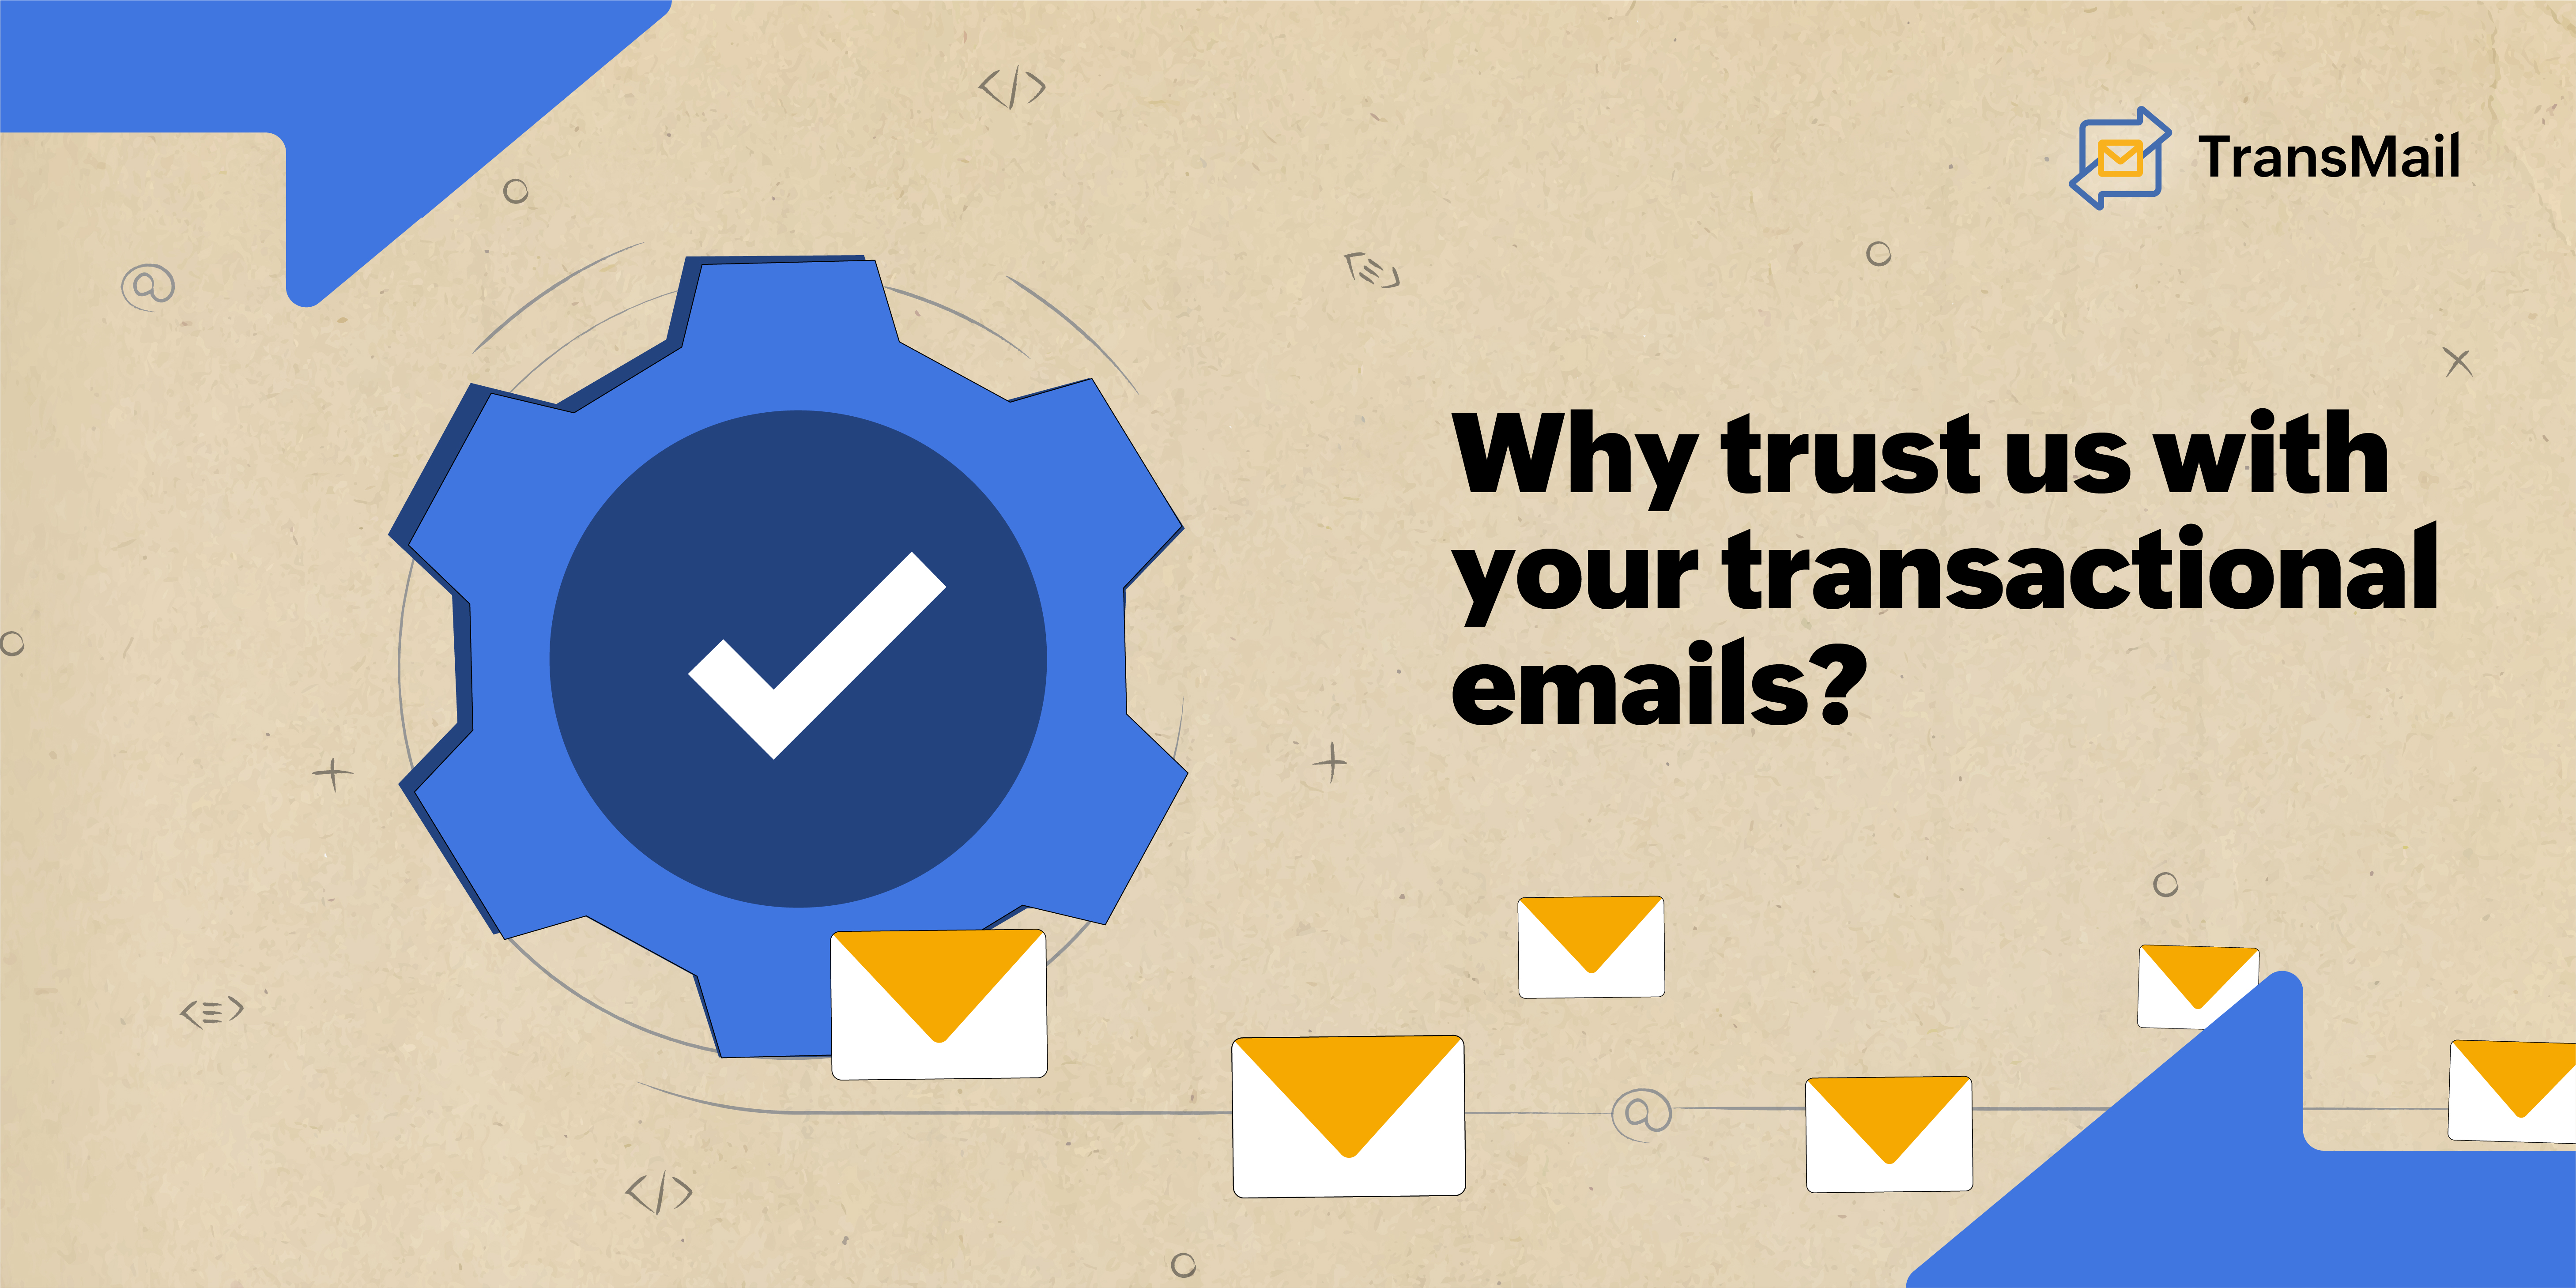 Choosing TransMail for your transactional emails